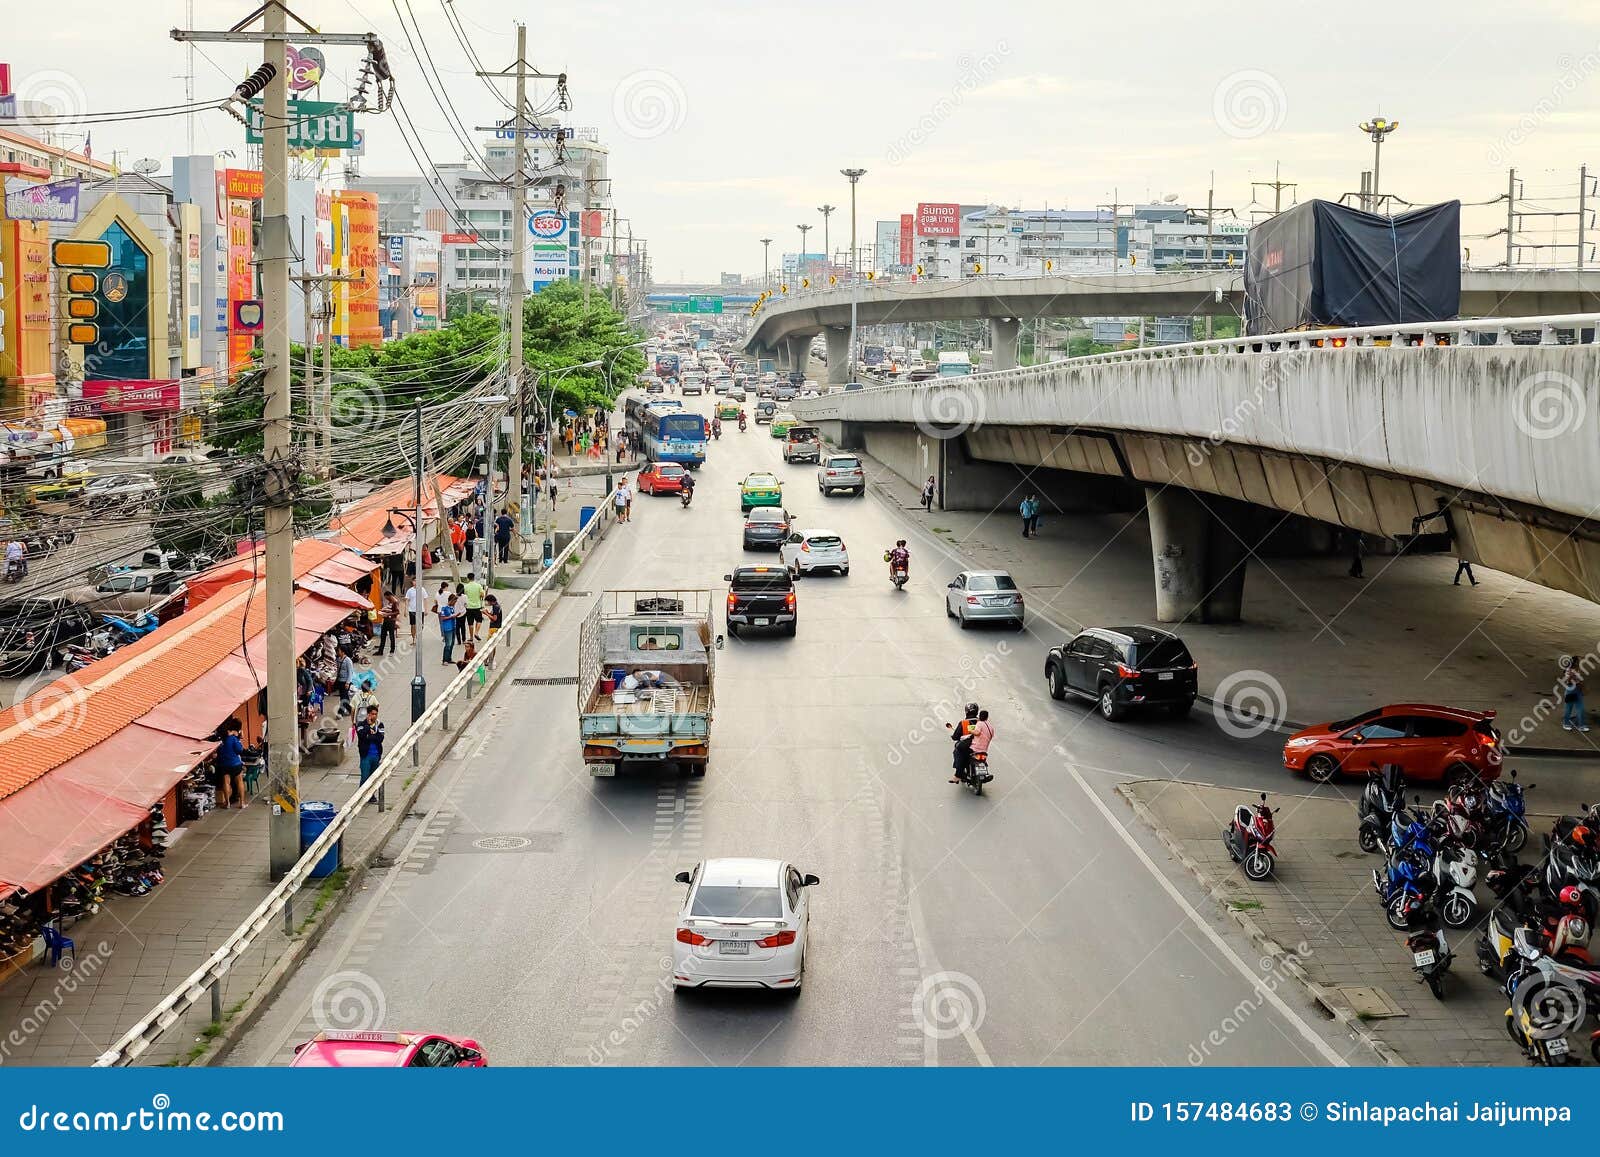 Many Car Bus And Motorcycle Cause Traffic Jams At Rangsit Pathum Thani Road With Tollway And Building Editorial Stock Photo Image Of City Elevated